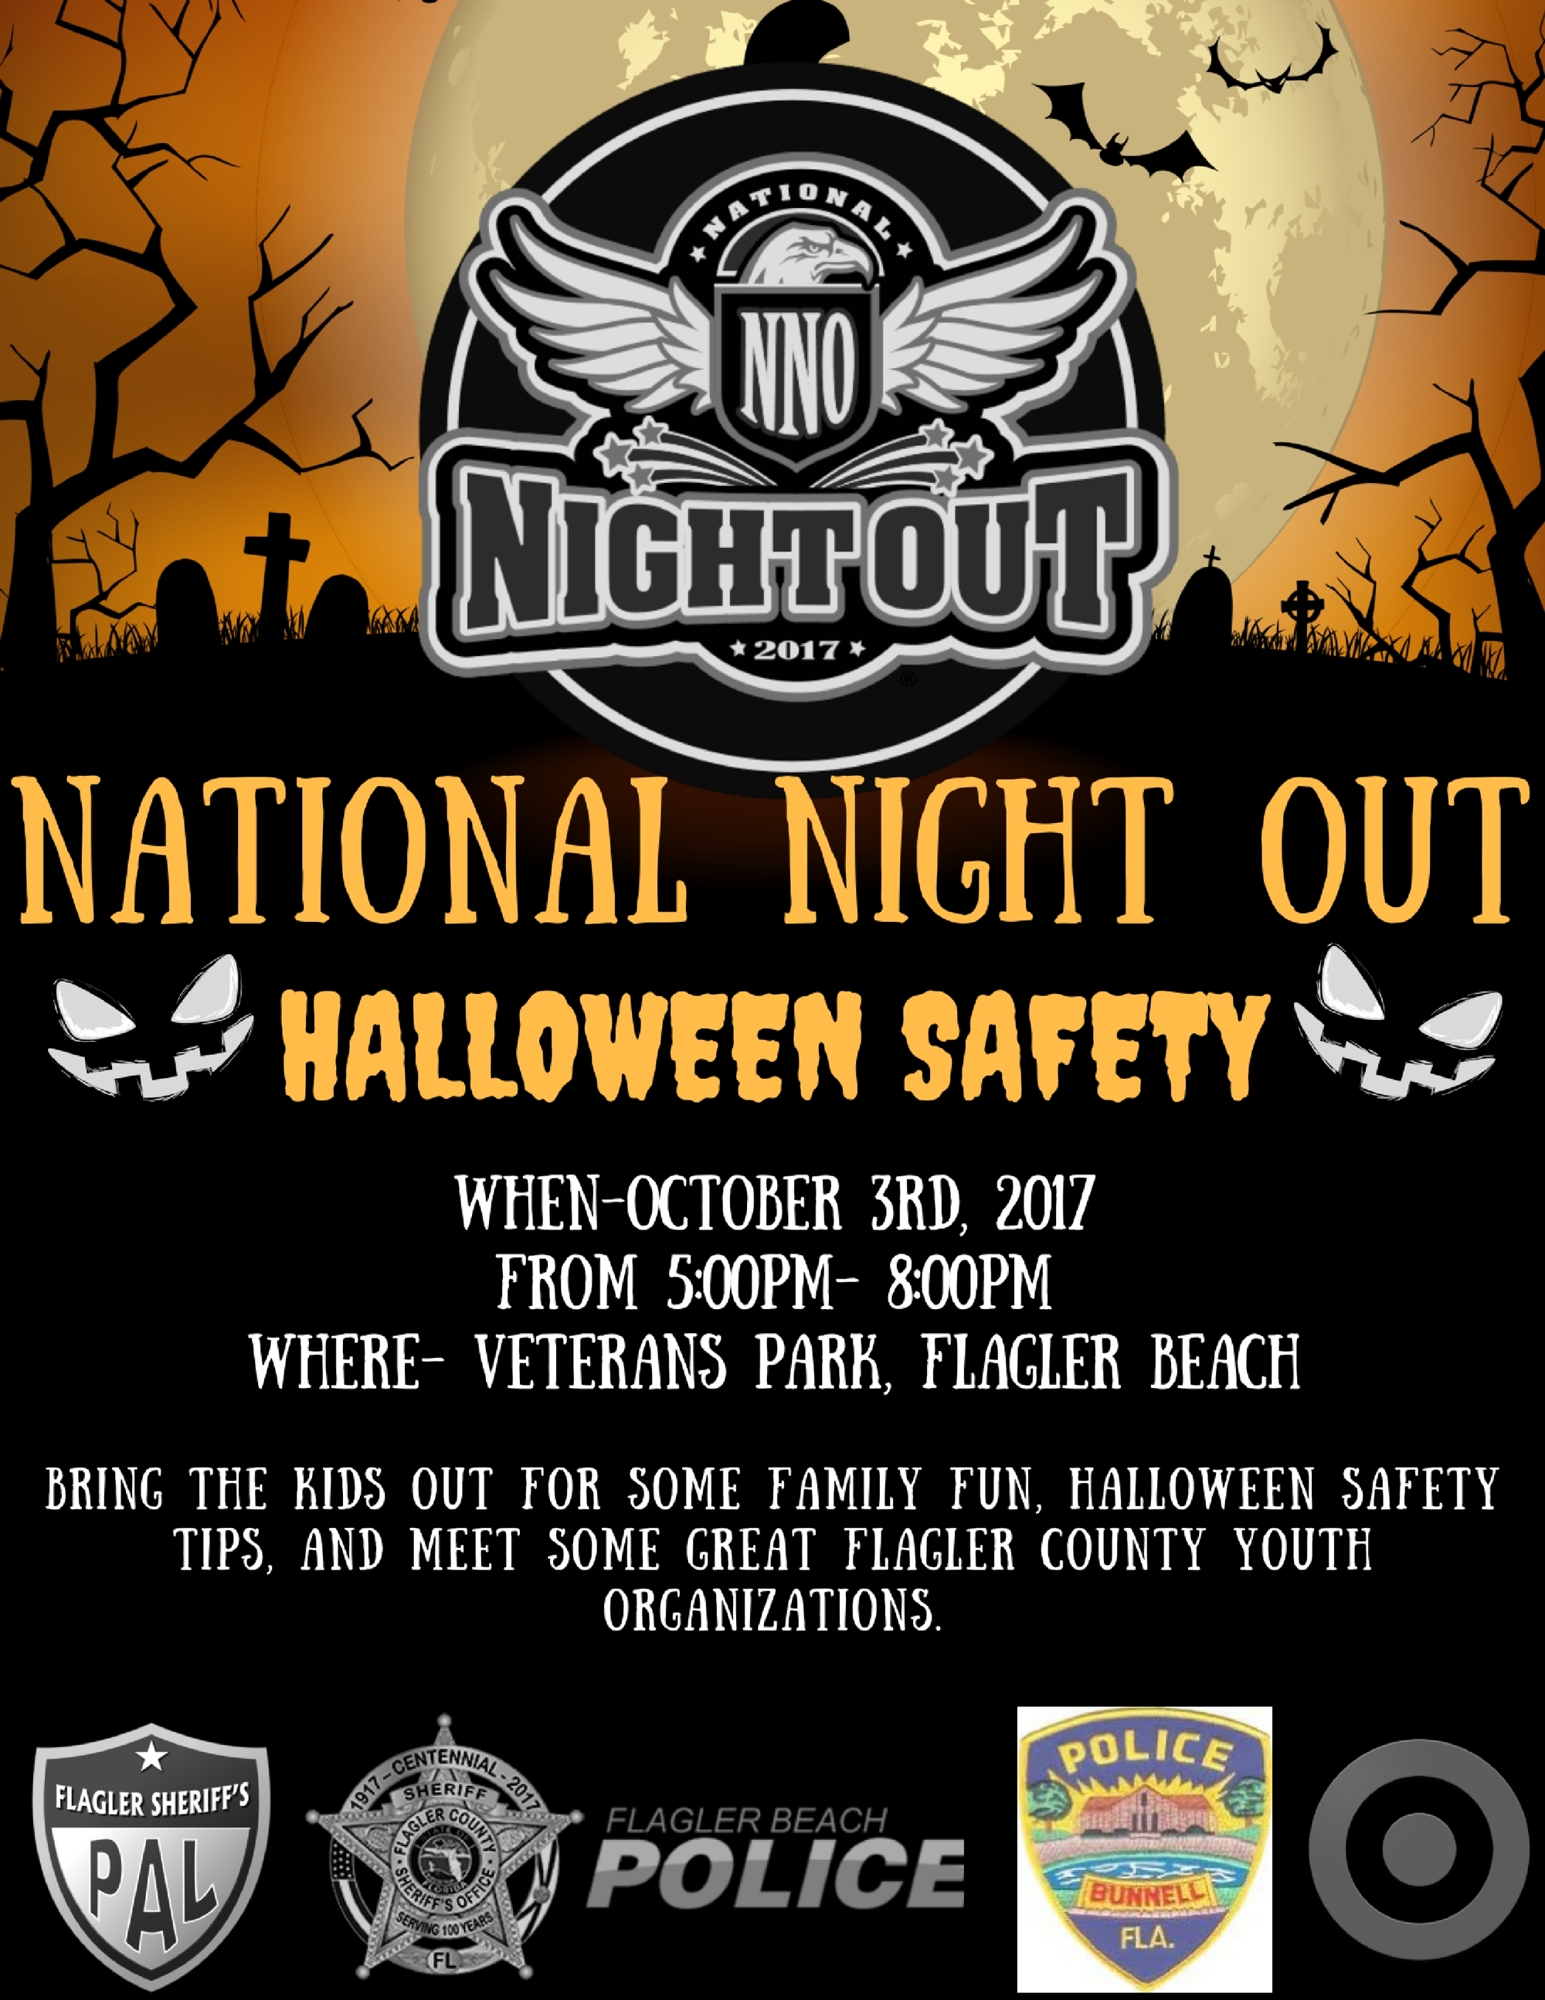 National Night Out will be on Oct. 3.